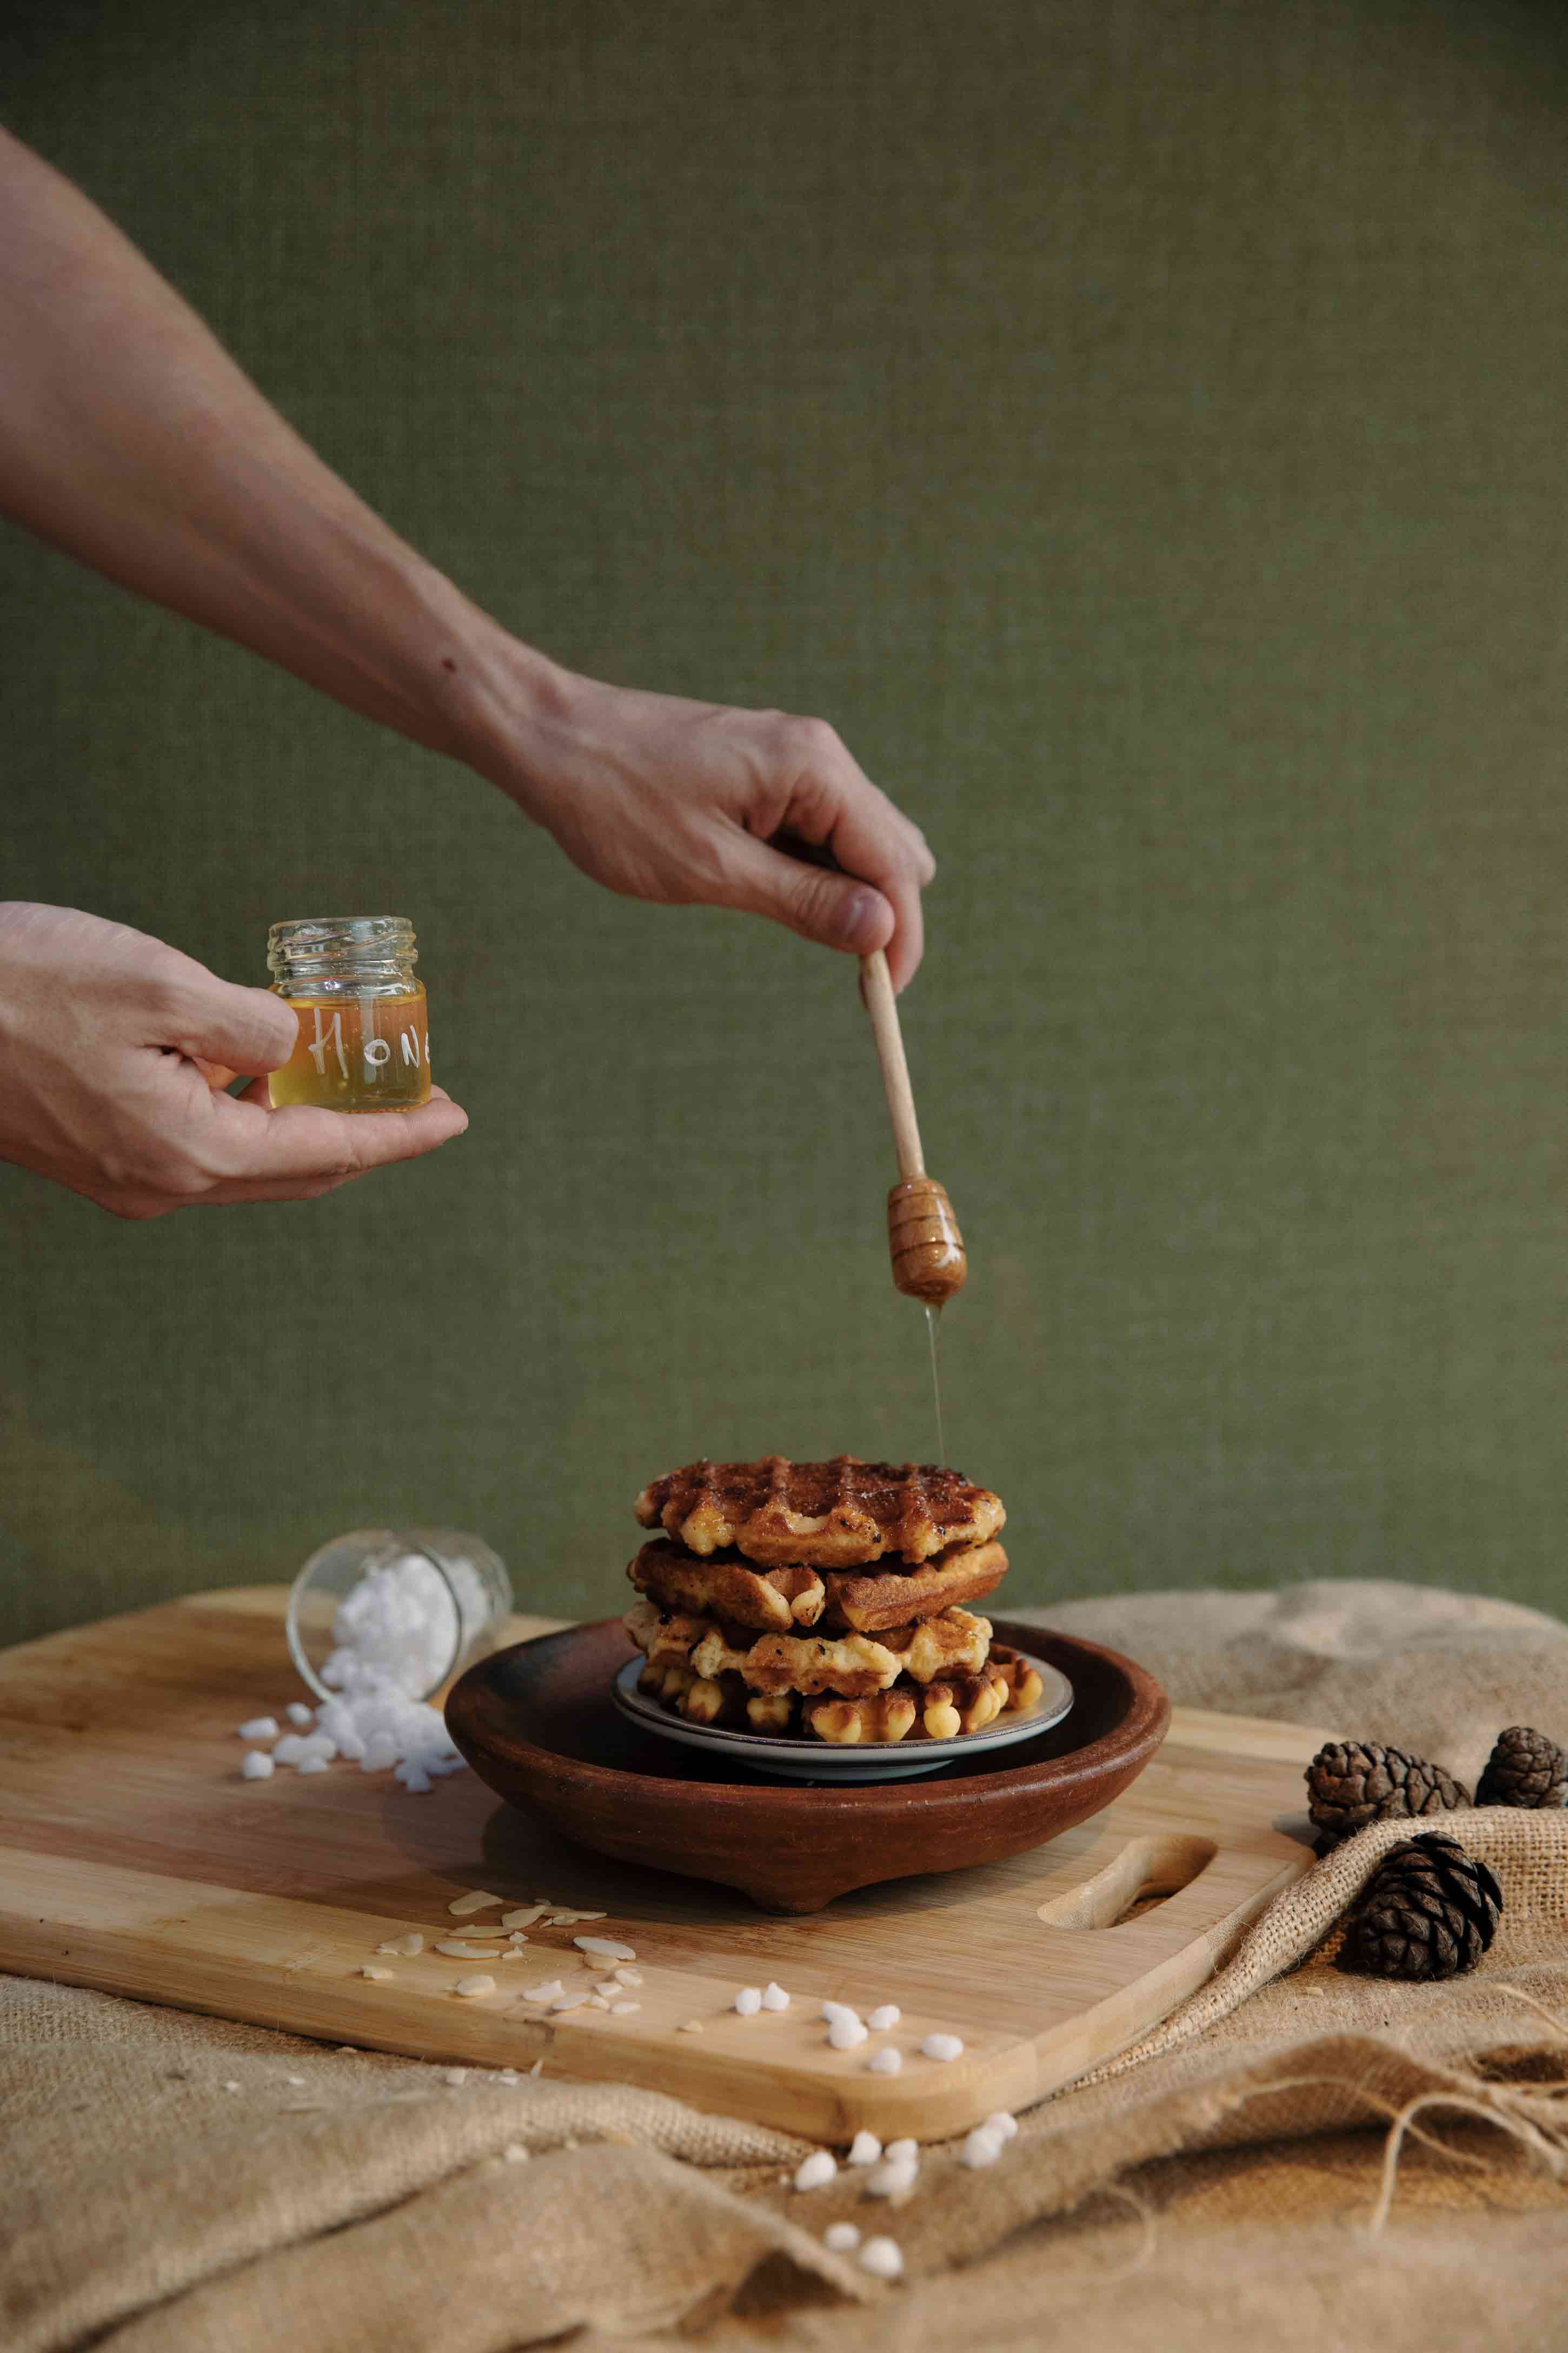 Honey, milk, and eggs are among Monsieur Waffles' locally-sourced ingredients